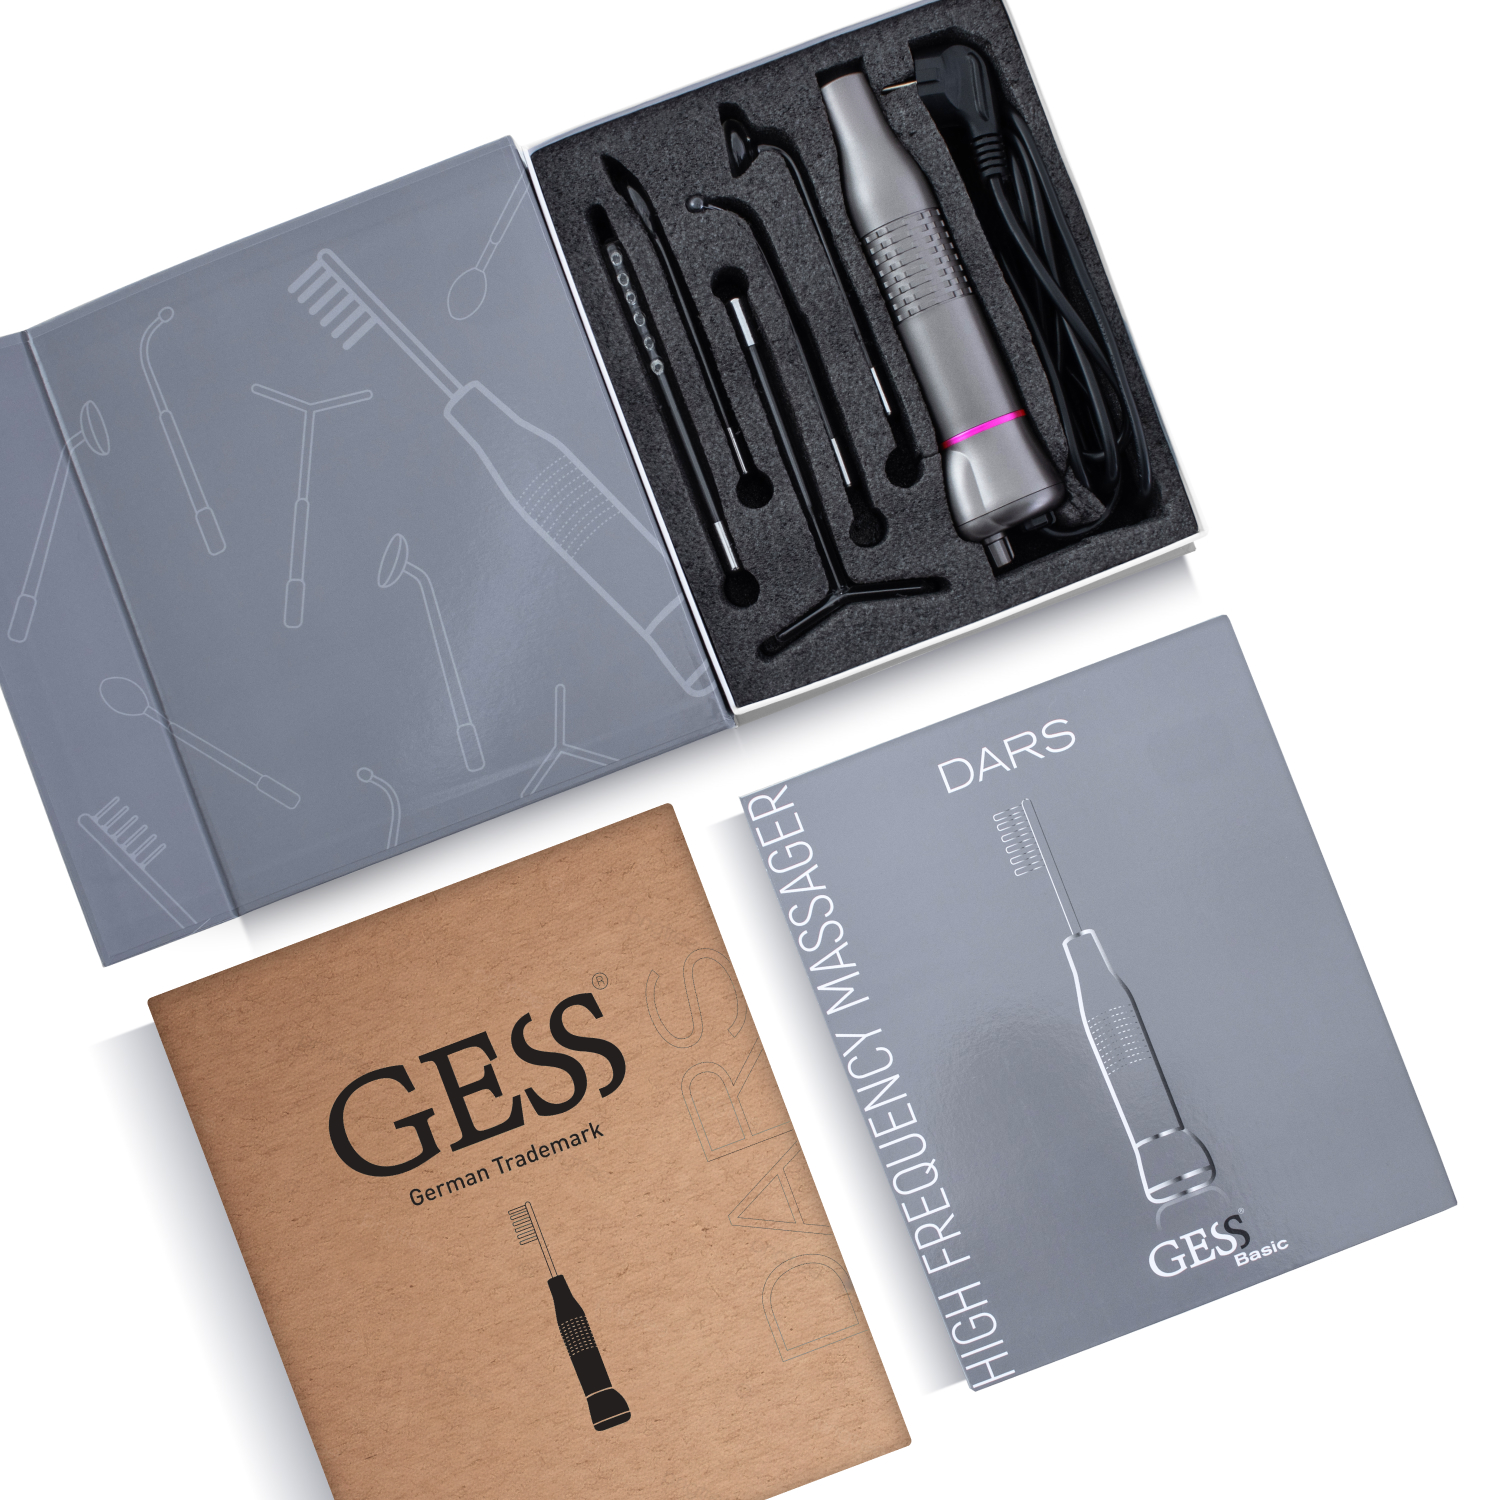 Darsonval_high-frequency_acne and wrinkle treatment-GESS-Dars (8)